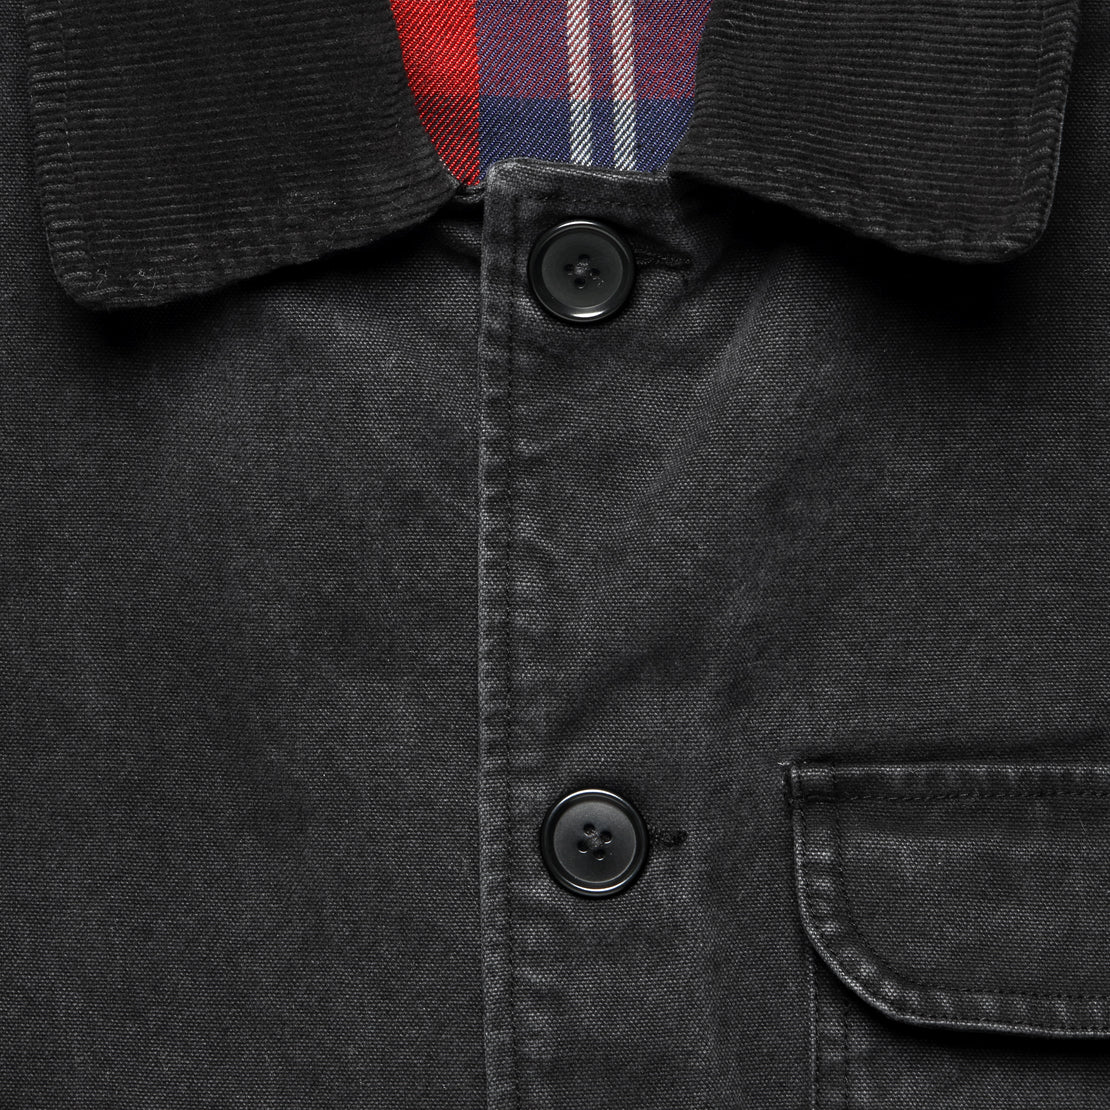 Frontier Jacket - Washed Black - Alex Mill - STAG Provisions - Outerwear - Coat / Jacket